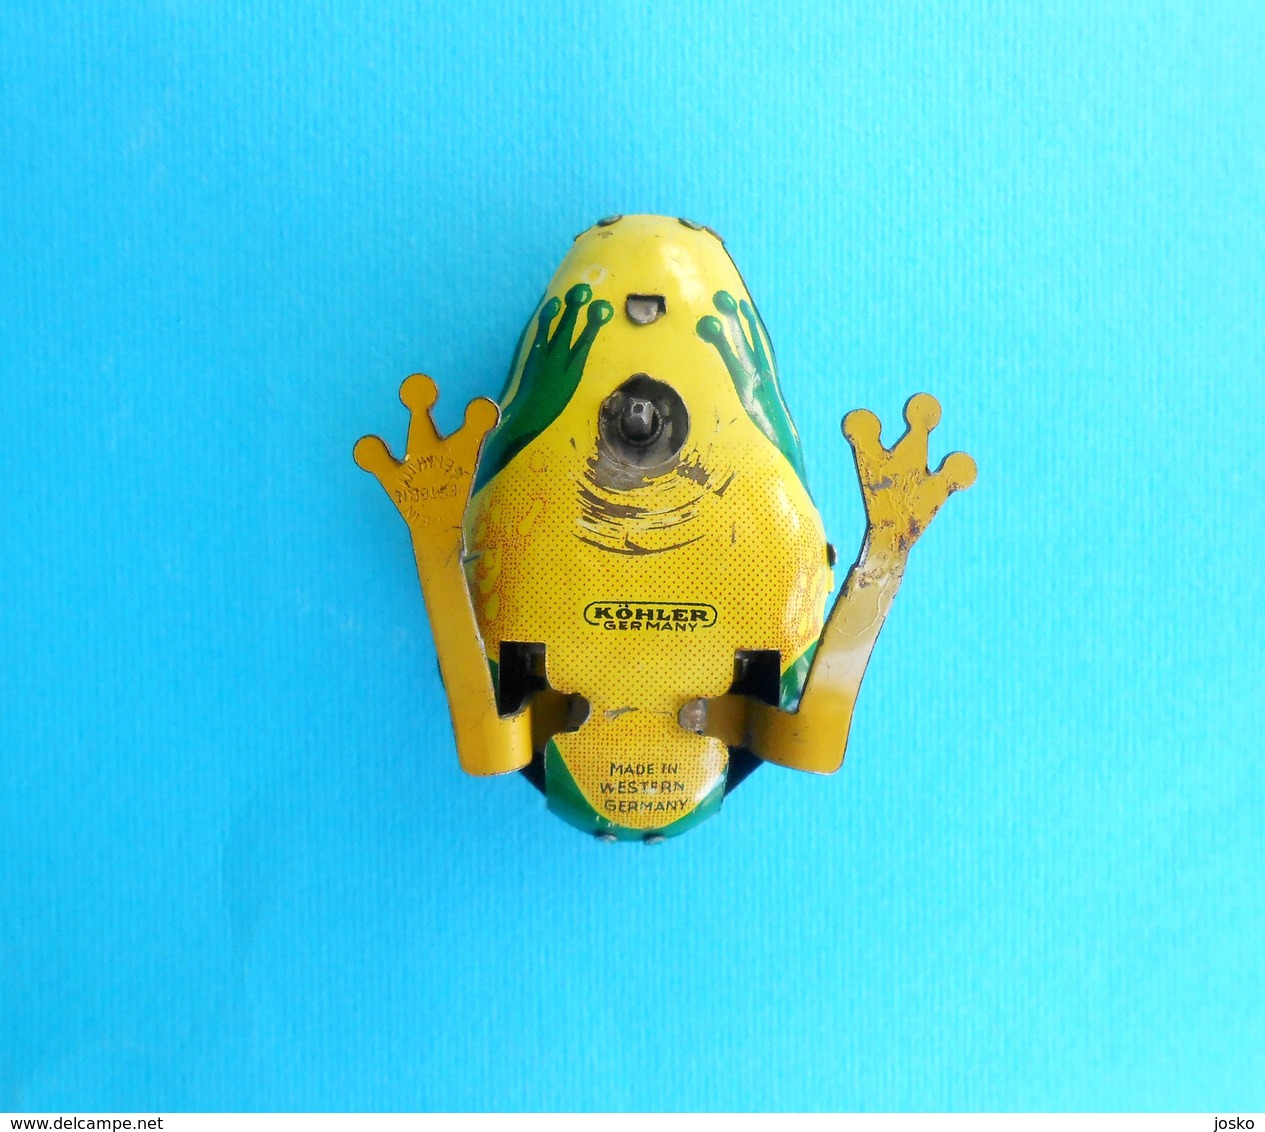 FROG - by Kohler Made in West Germany - vintage wind-up tin toy * TOP ... IN WORKING CONDITION * grenouille frosch rana